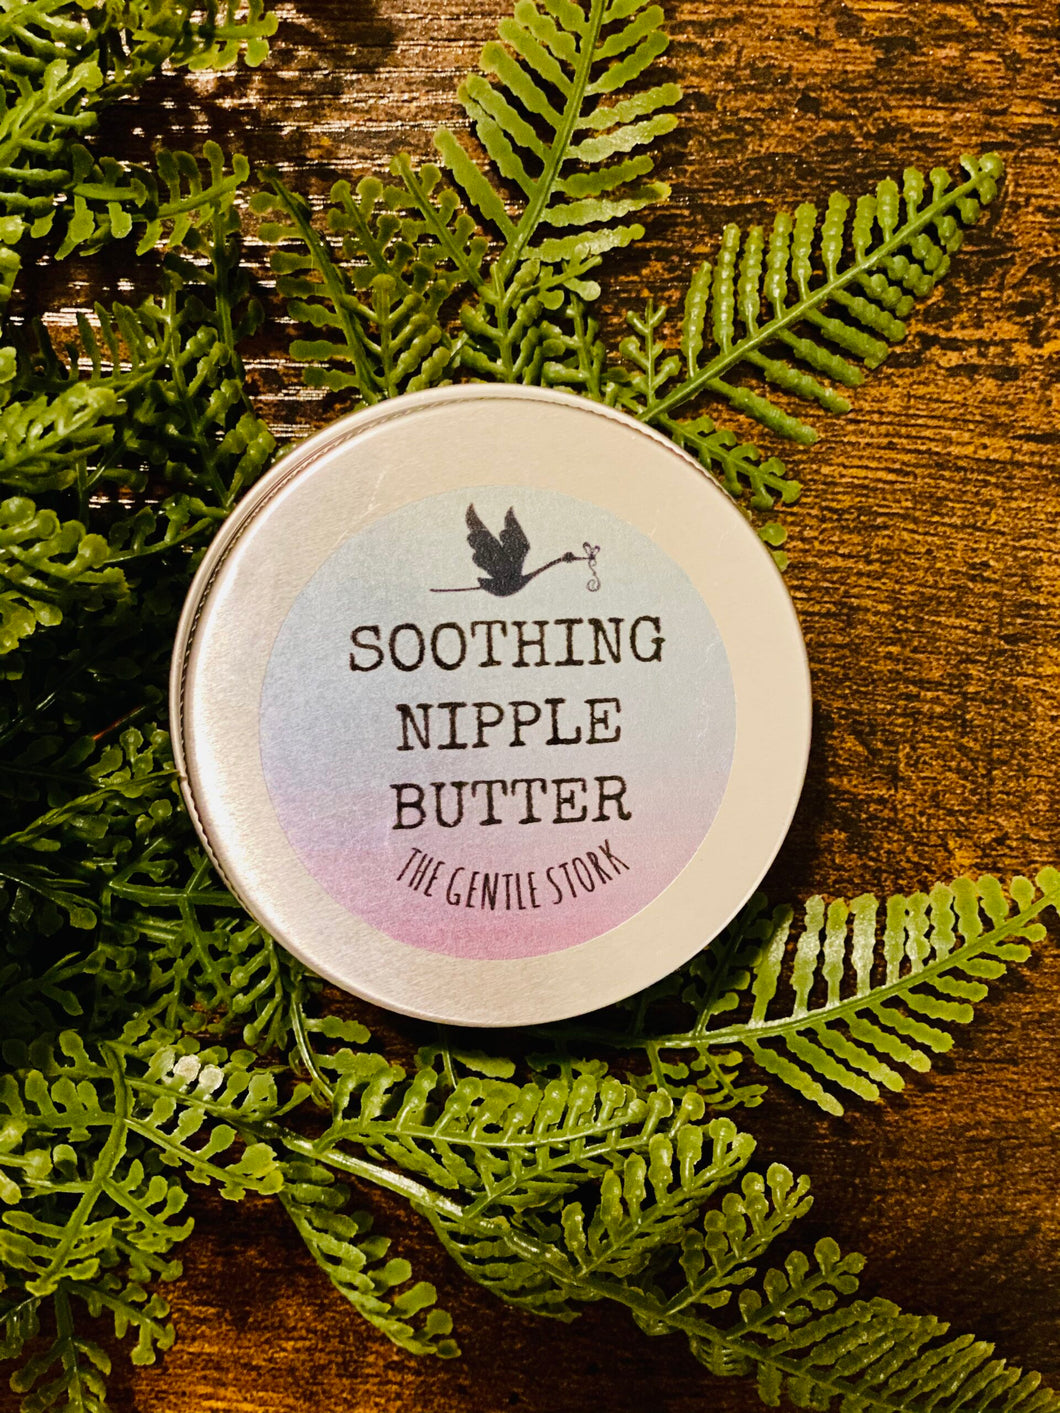 Soothing Nipple Butter